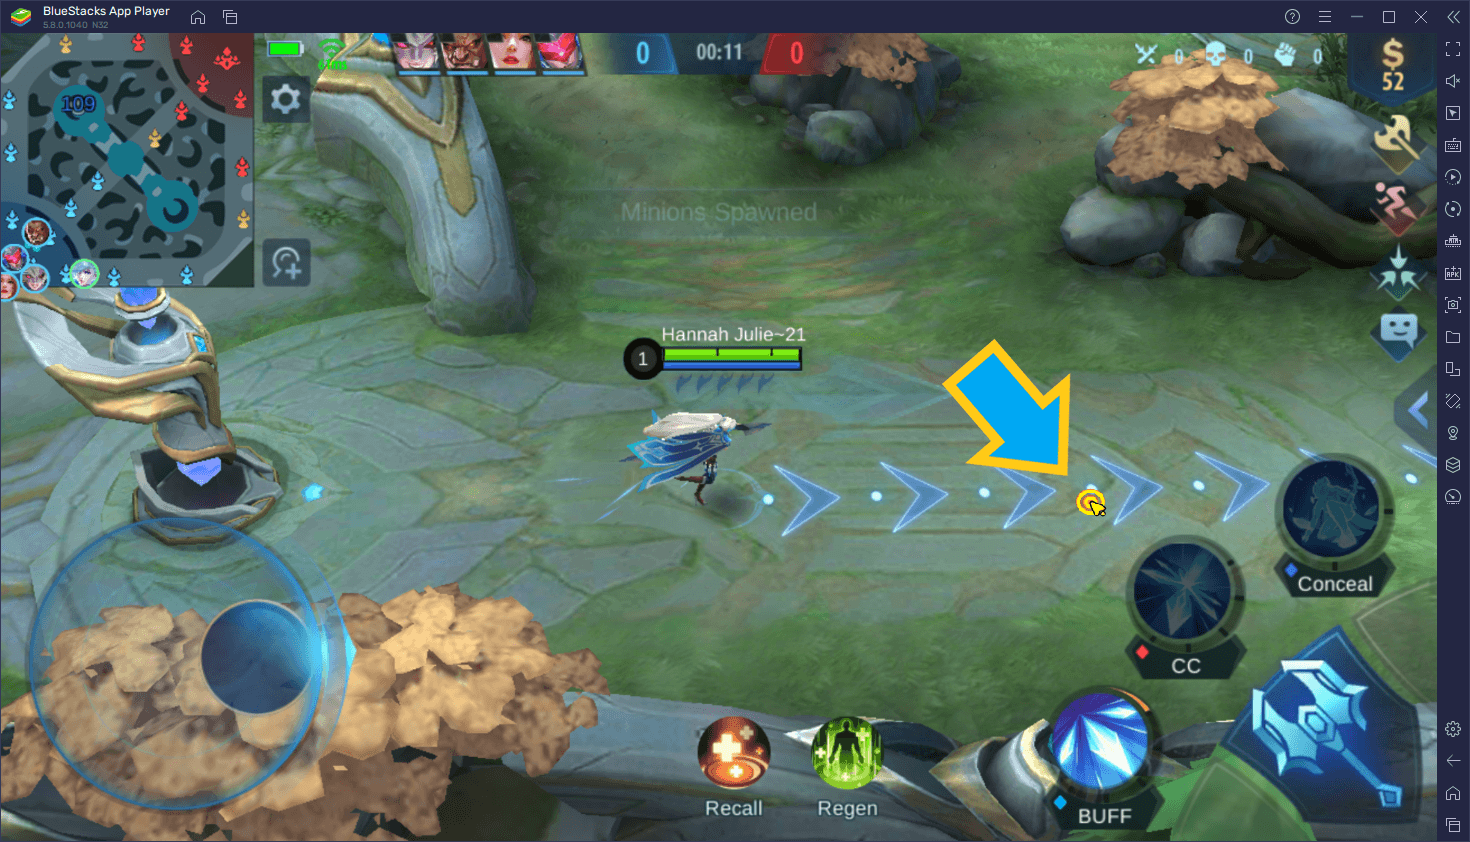 BlueStacks Version 5.8 Brings the ‘MOBA Cursor’ Feature for Mobile Legends and Other Games